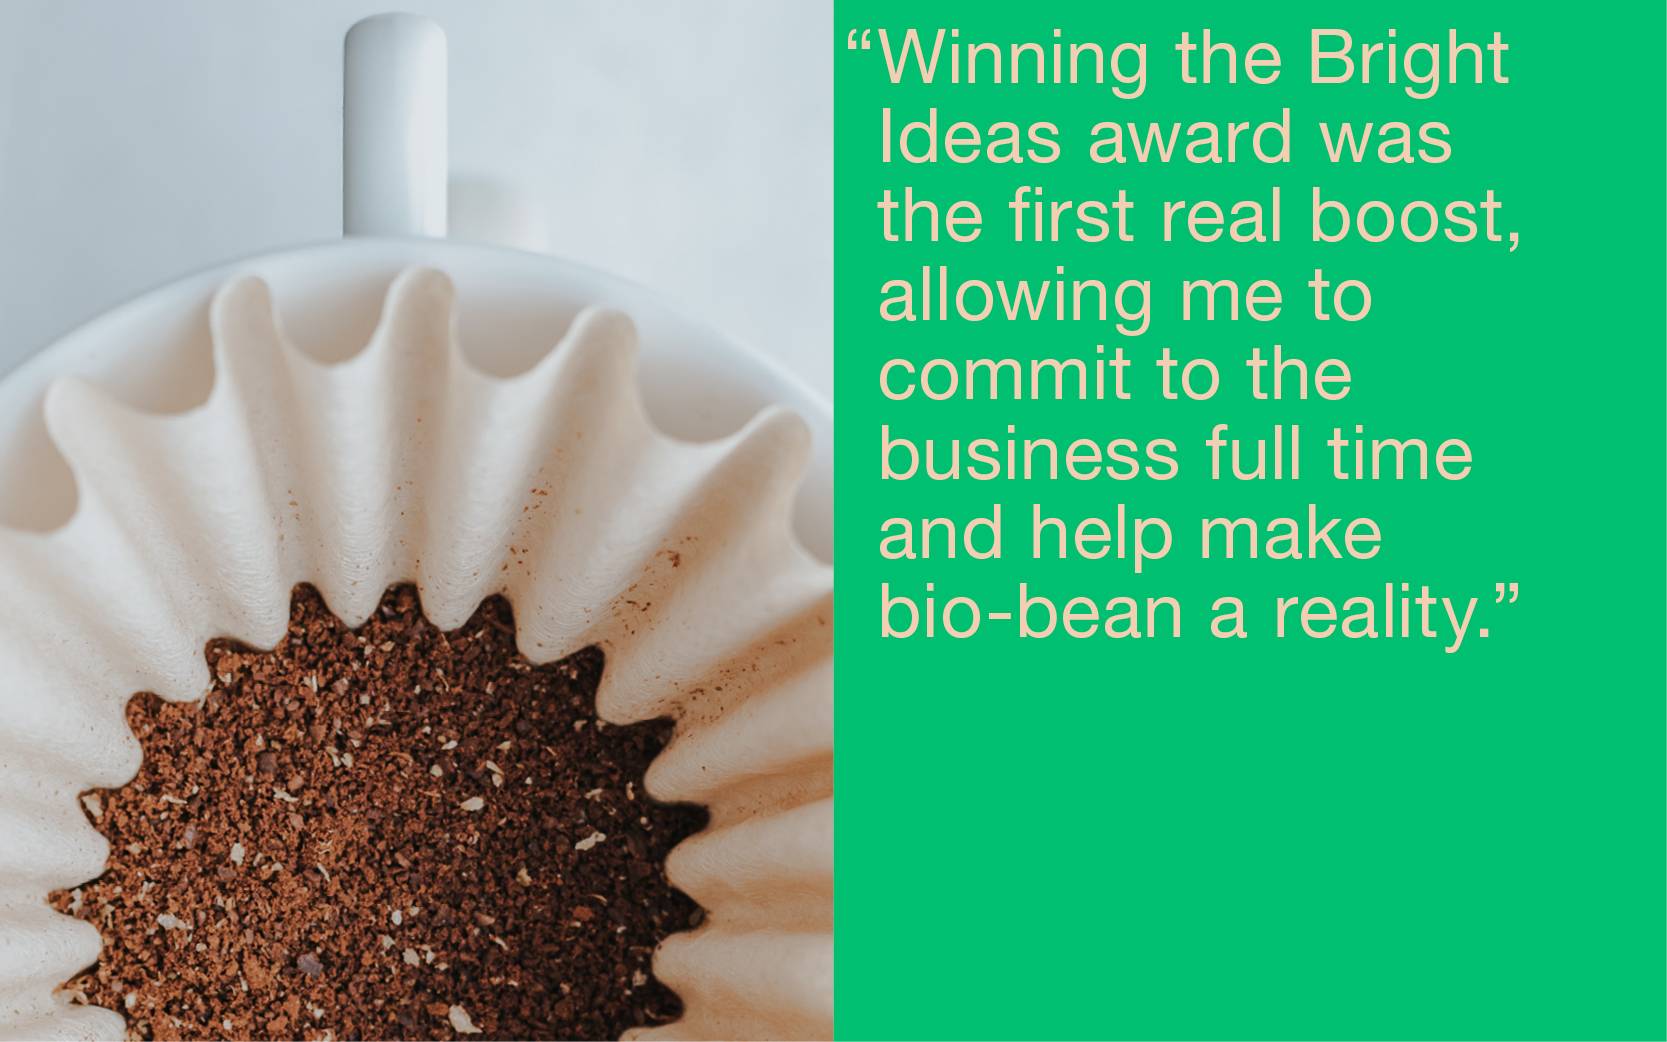 “Winning the Bright Ideas award was the first real boost, allowing me to commit to the business full time and help make bio-bean a reality.”